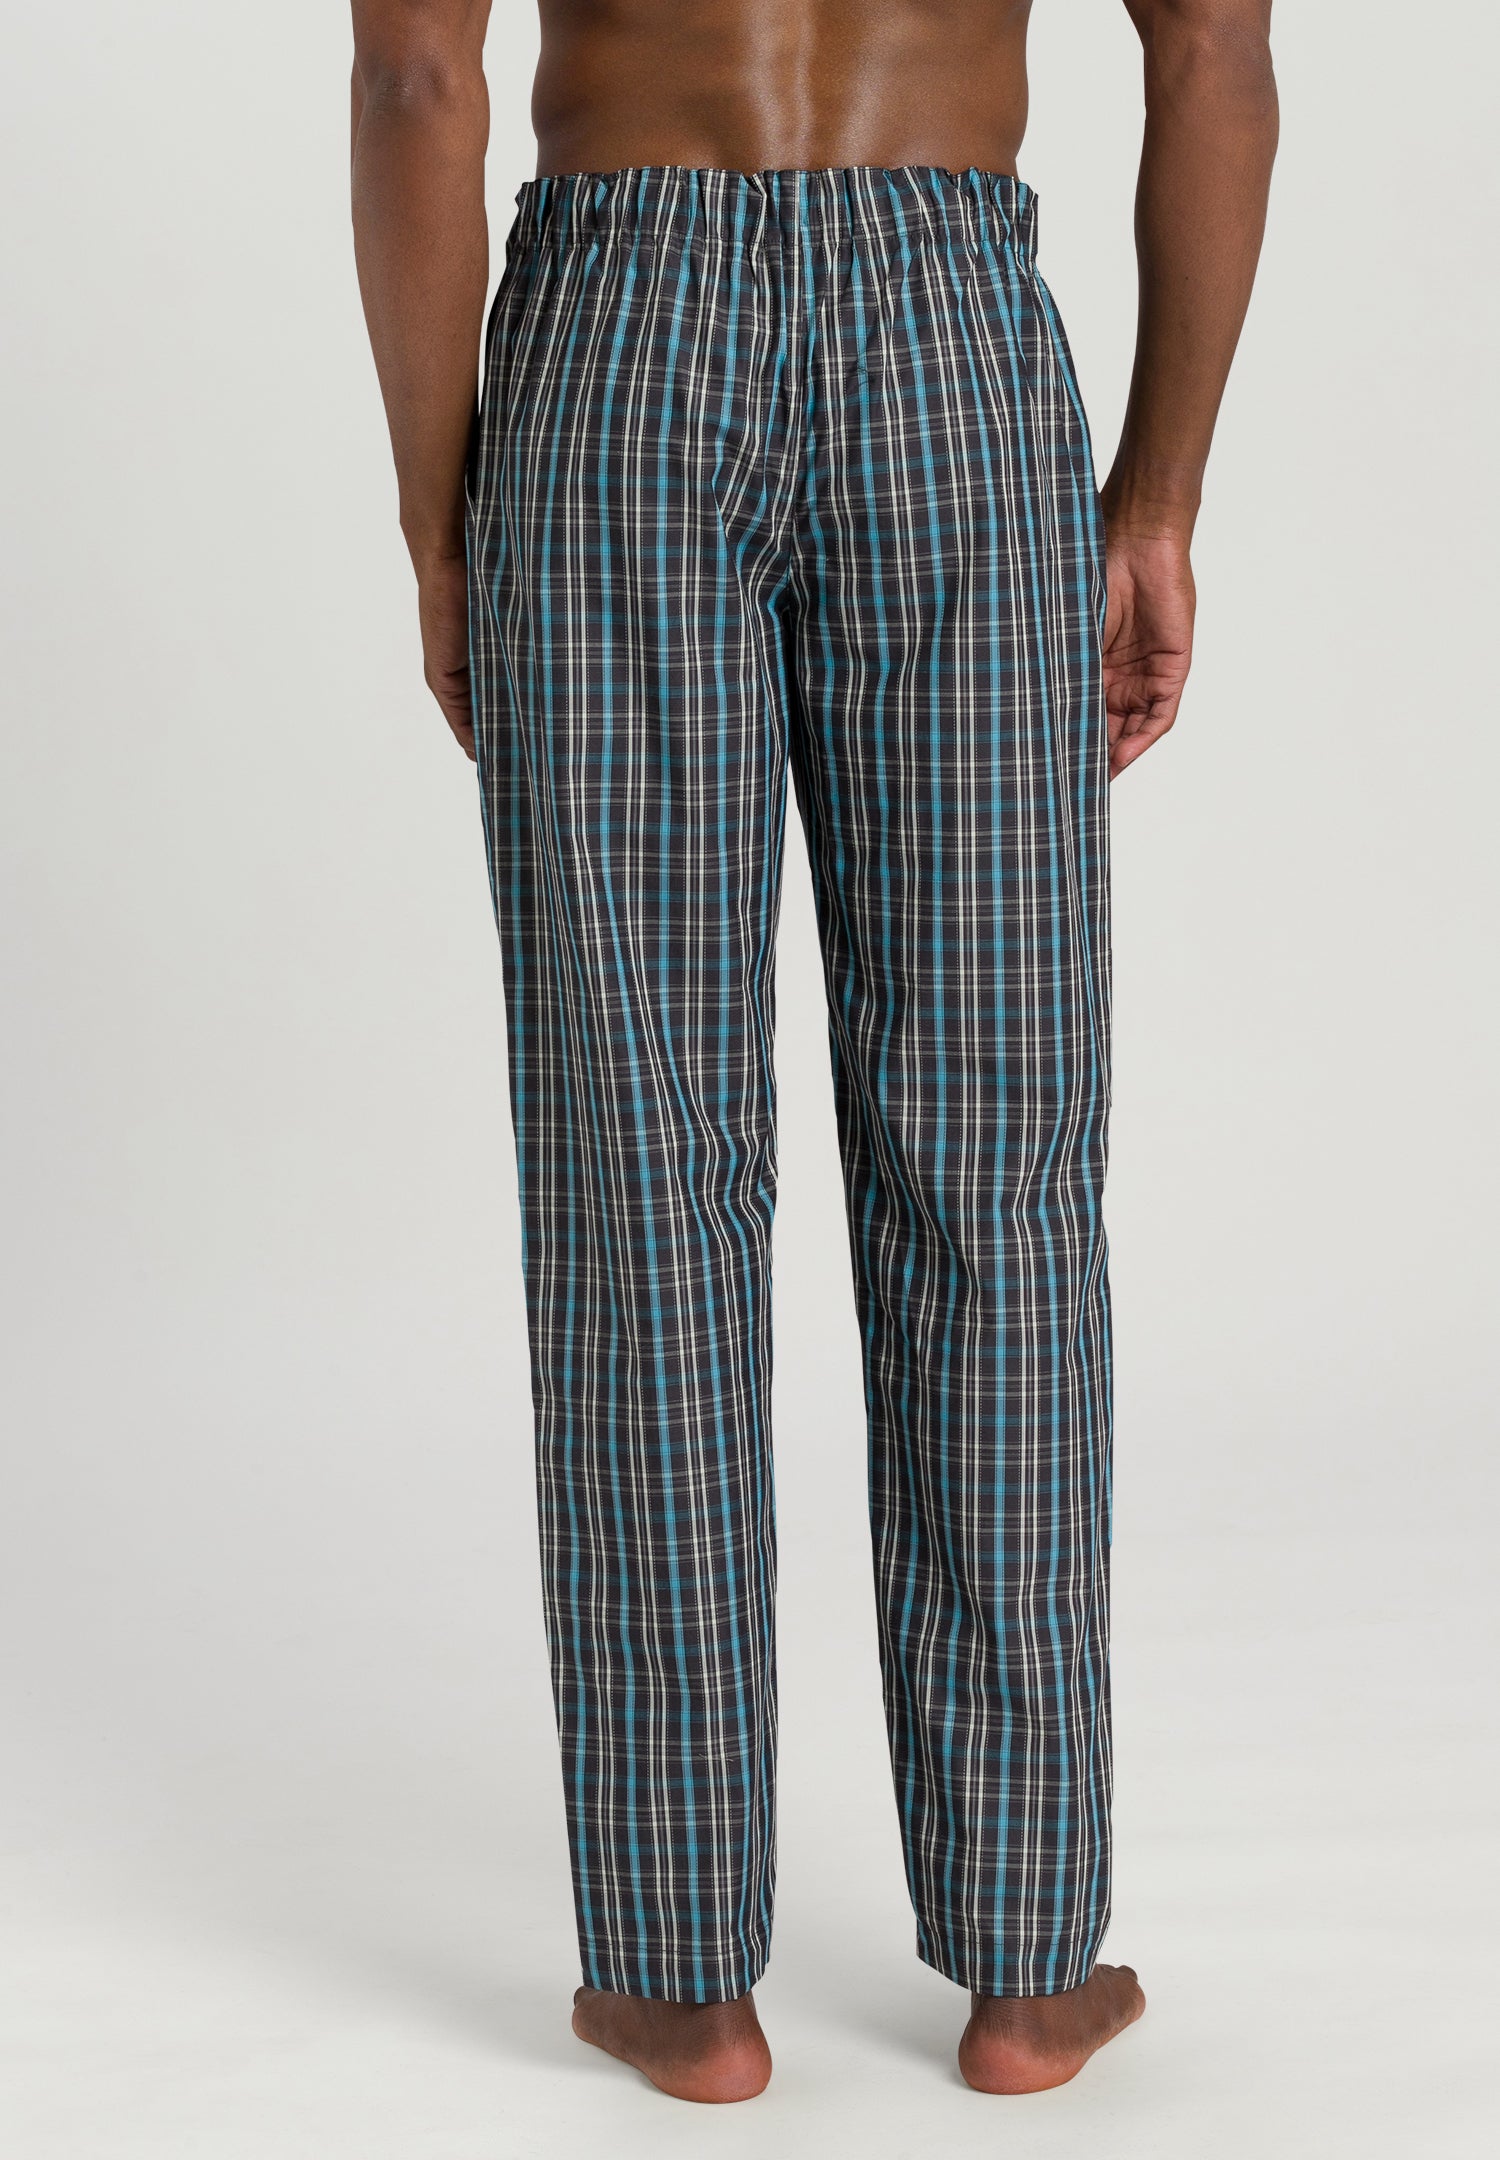 75436 Night & Day Woven Lounge Pant - 2970 Arctic Plaid Check